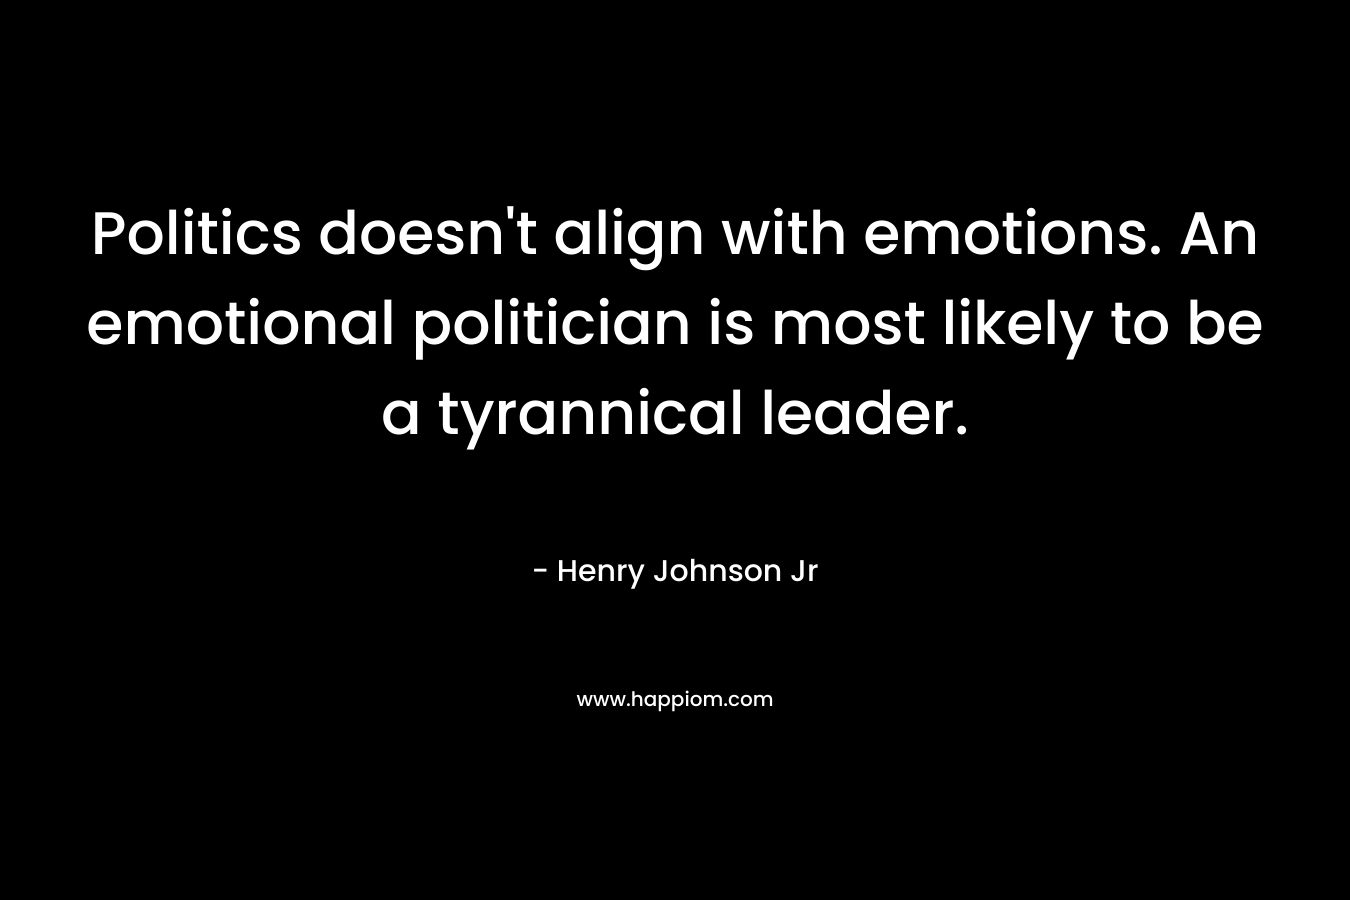 Politics doesn’t align with emotions. An emotional politician is most likely to be a tyrannical leader. – Henry Johnson Jr